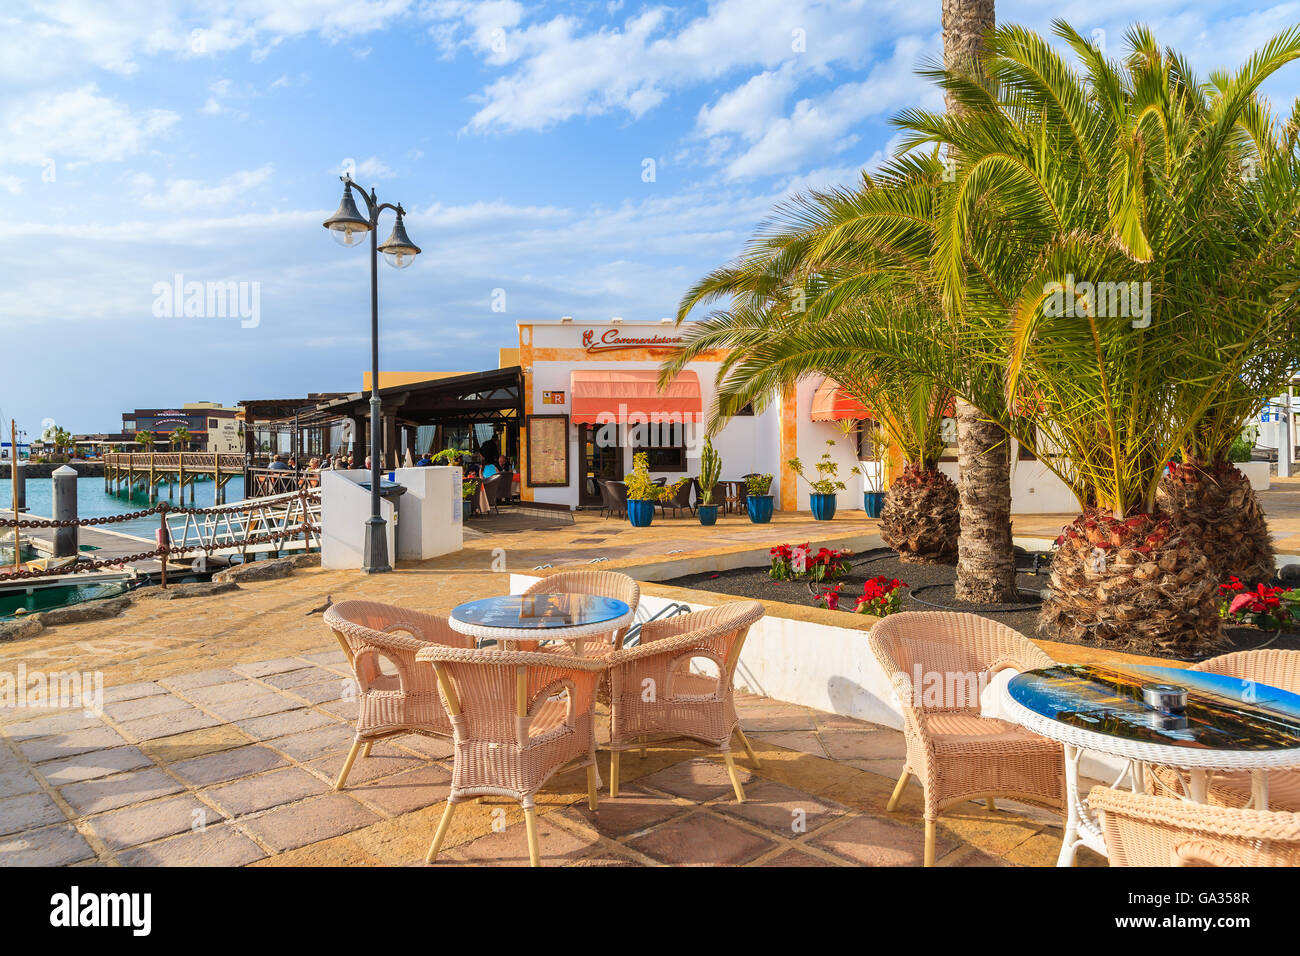 MARINA RUBICON, LANZAROTE ISLAND - JAN 11, 2015: restaurant tables in Rubicon port, Playa Blanca town. Canary Islands are popular holiday destination due to sunny tropical climate. Stock Photo